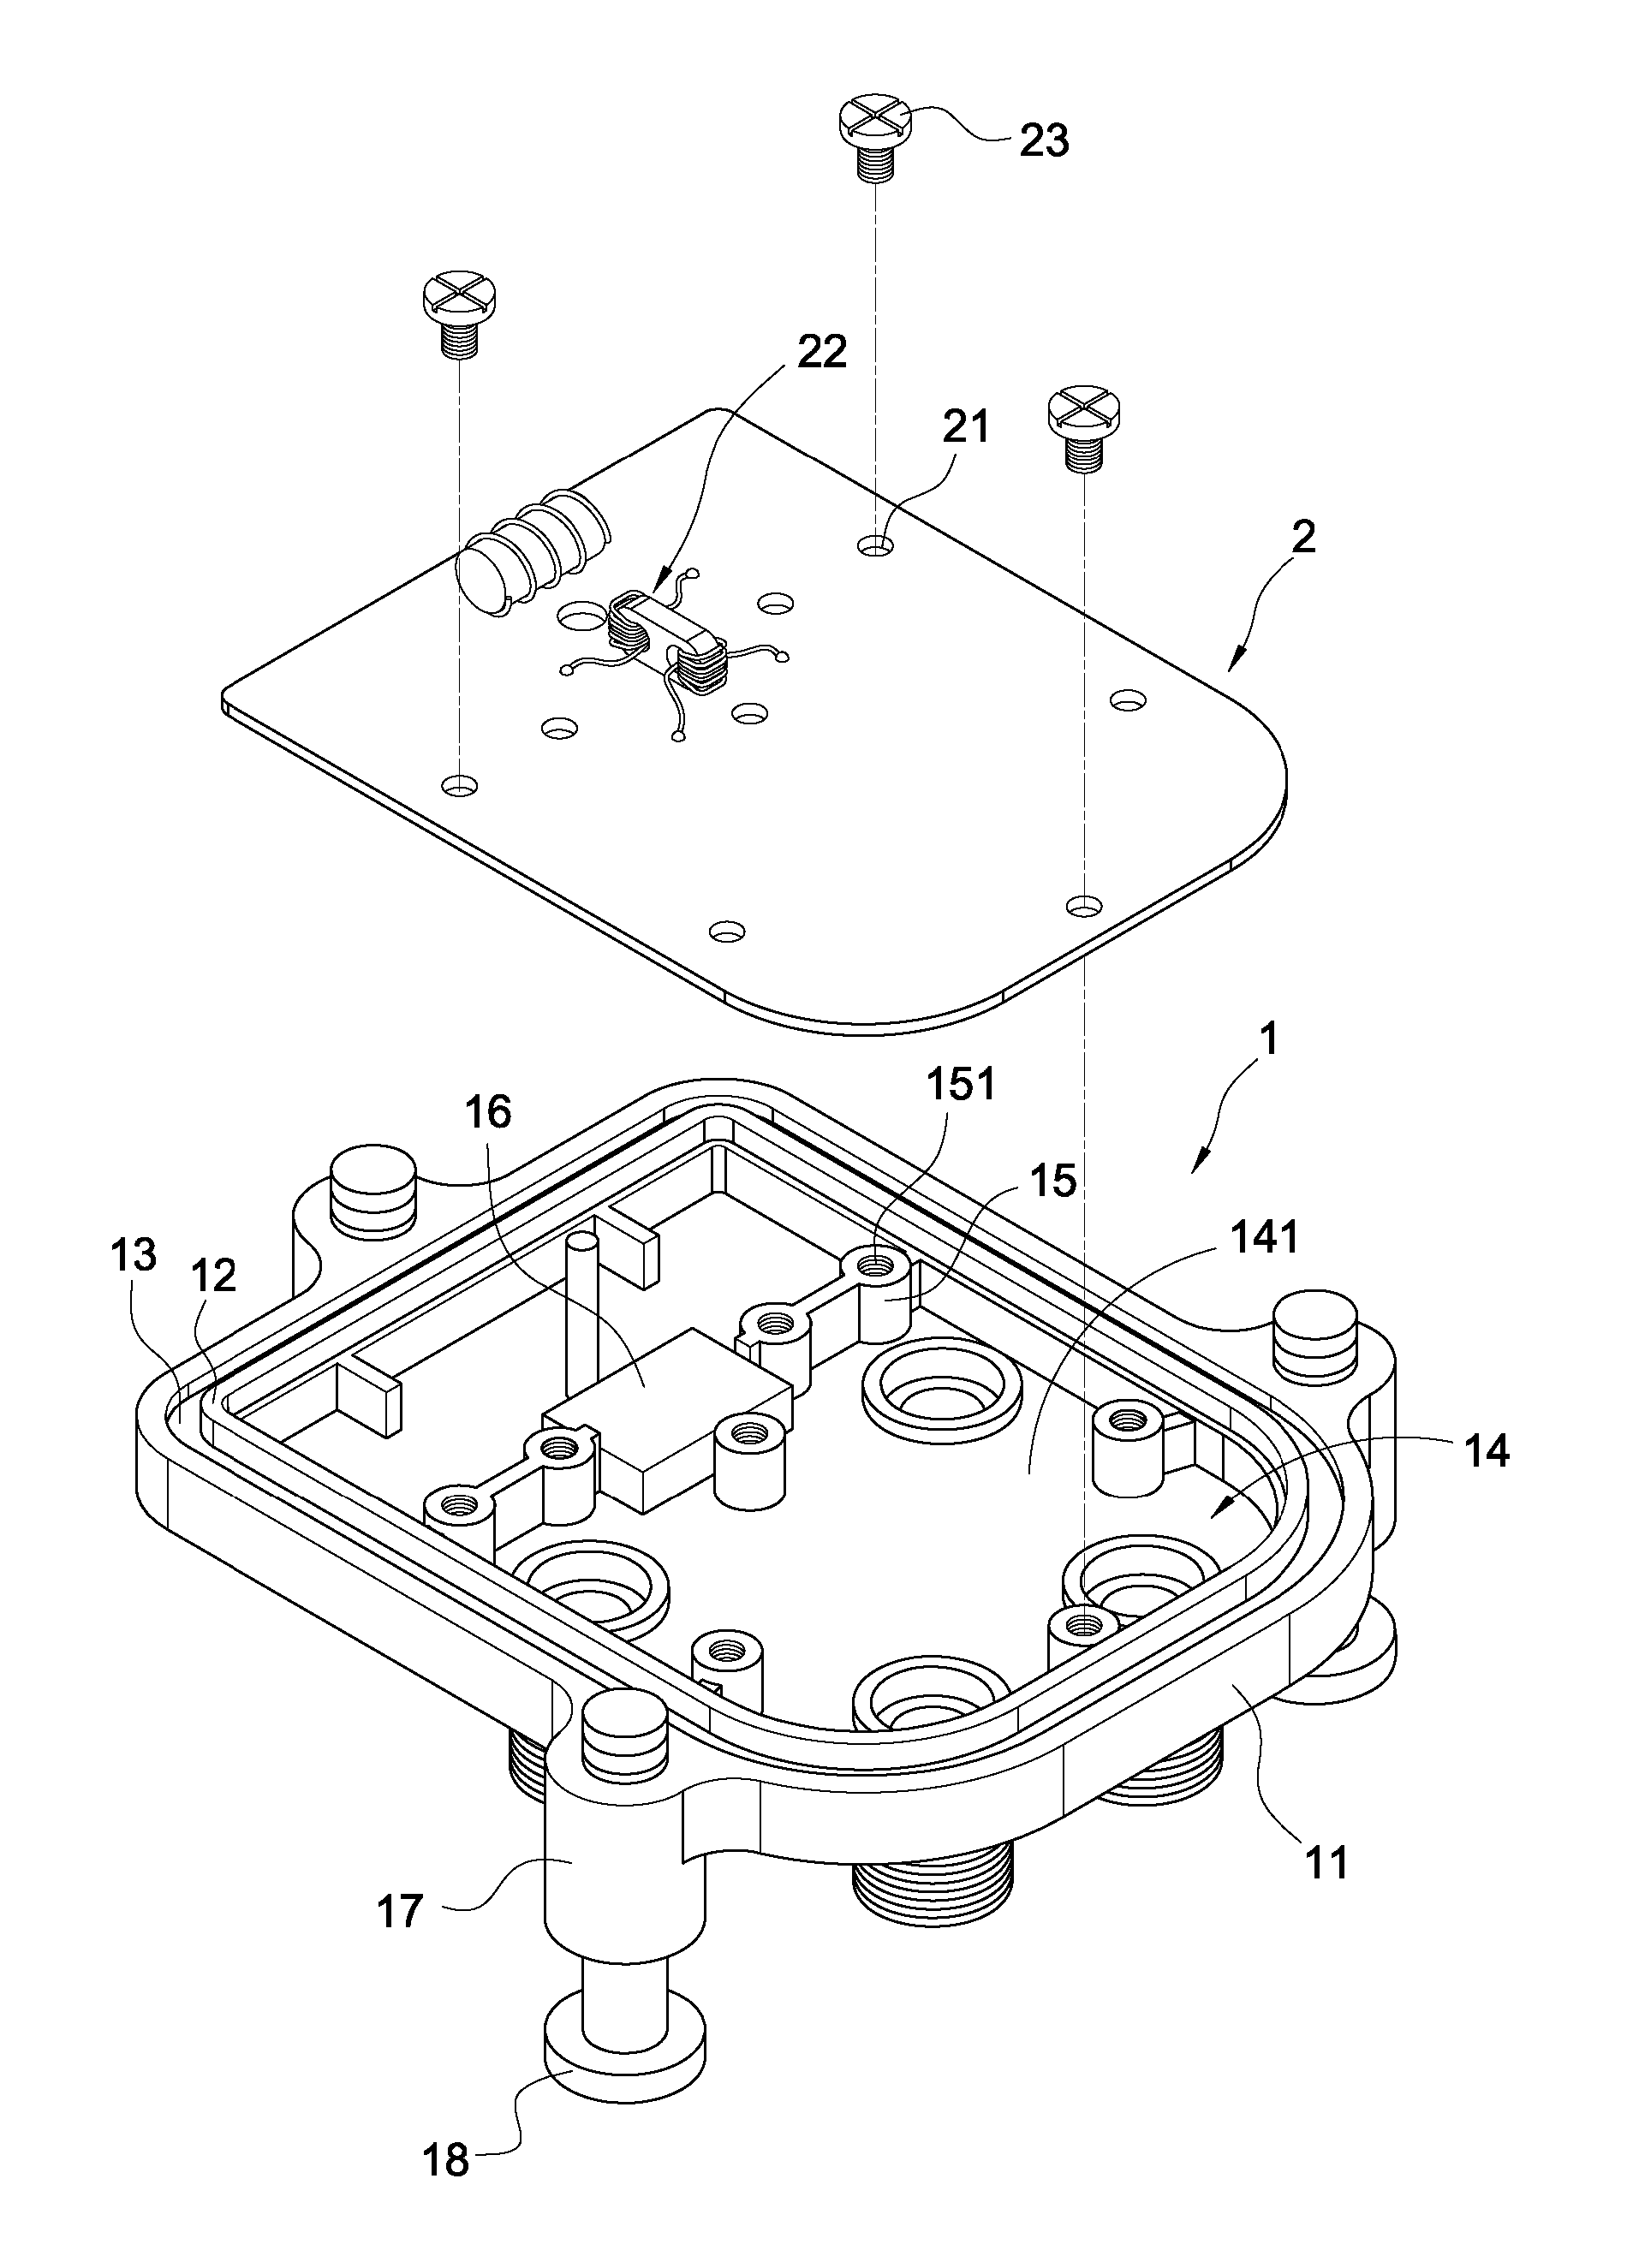 RF directional coupler circuit assembly for matching high frequency cable TV apparatus